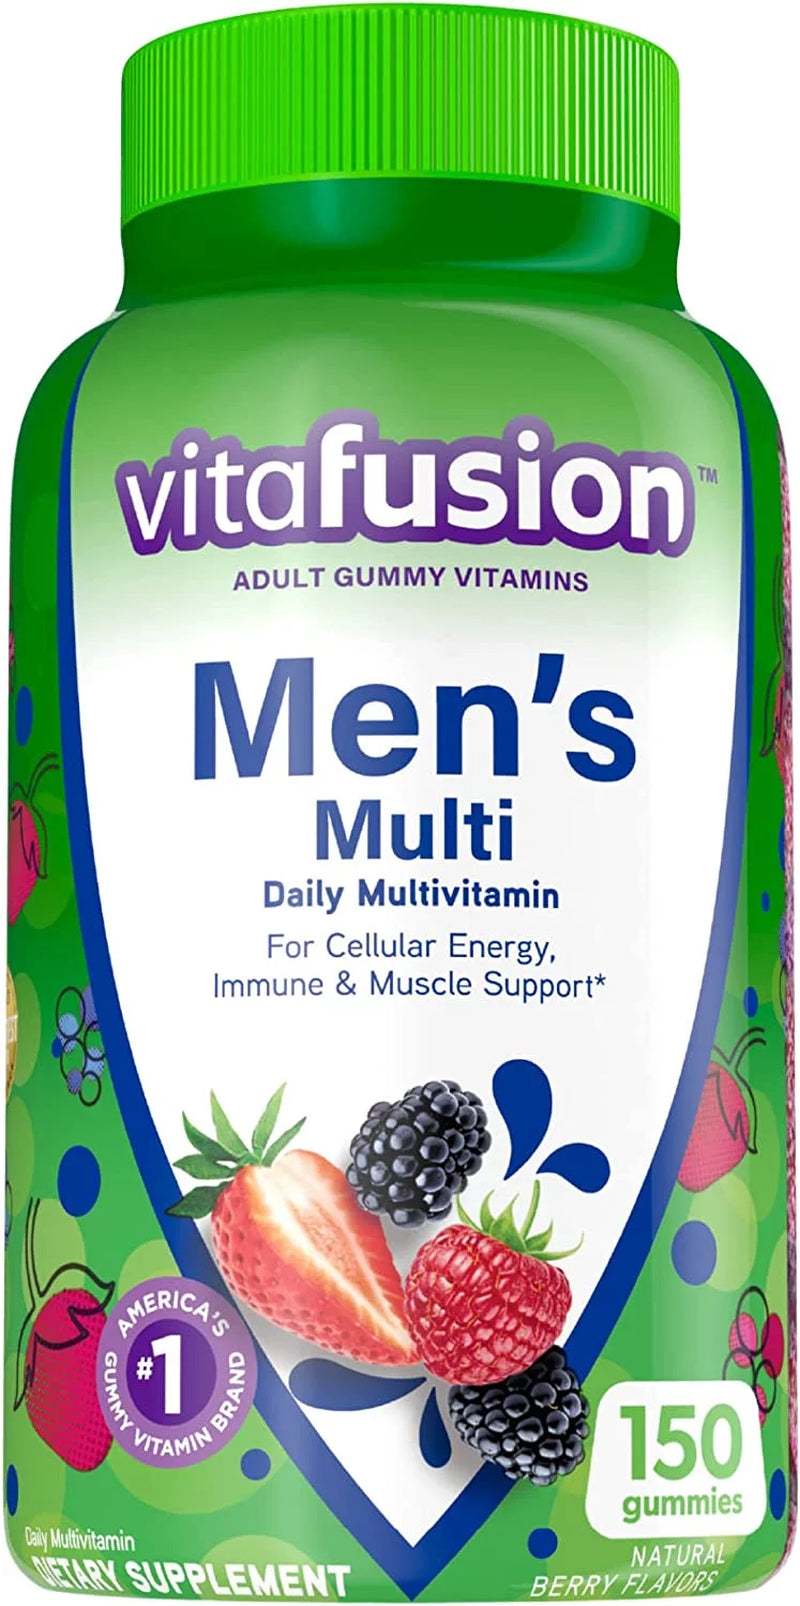 Multipack:Vitafusion Gummy Vitamins for Men, Berry Flavored Daily Multivitamins for Men, 150 Count|7Pack